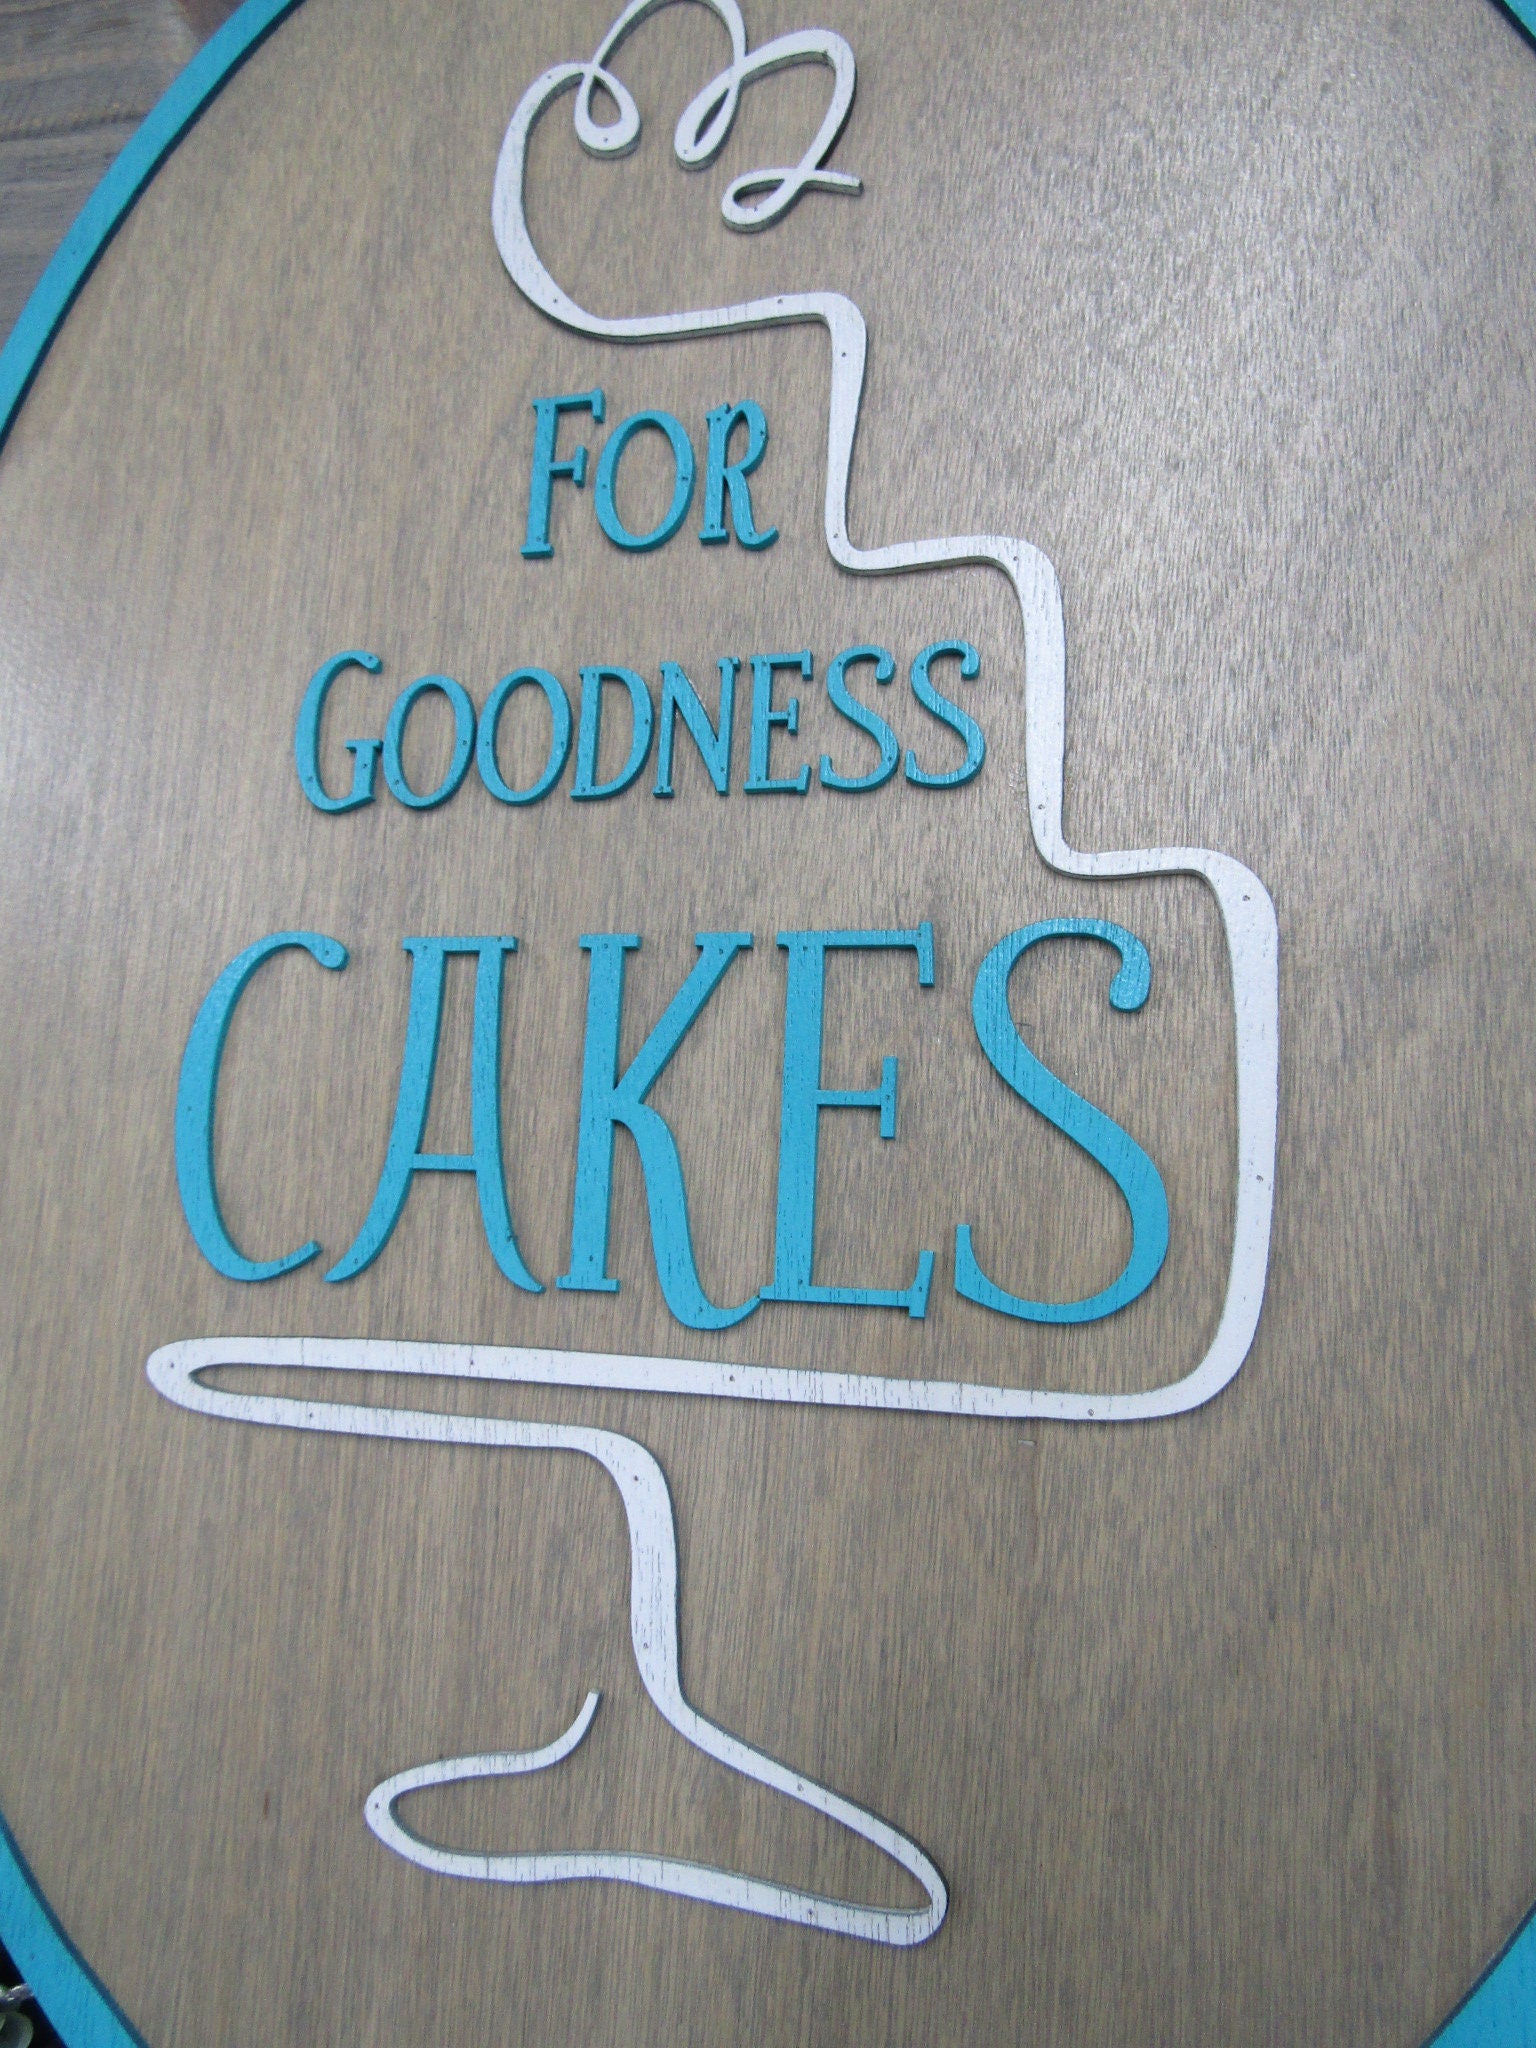 Custom Commerical Signage Bakery Baker Cake Sign Raised Text 3D Oval Sign Oversized Made to Order Handmade Business Sign Your Actual Logo